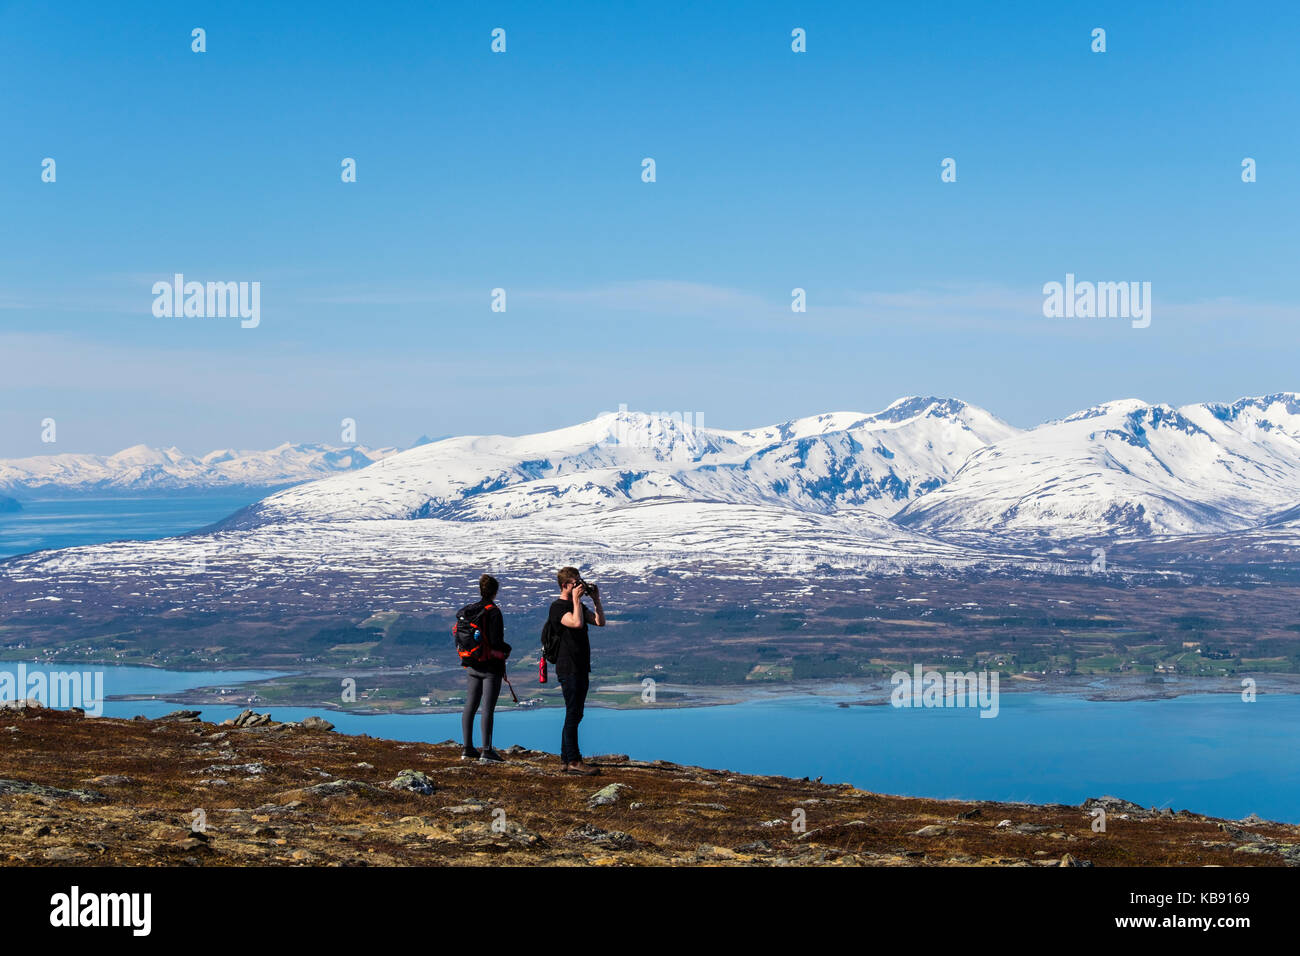 Hikers on Mount Storsteinen looking at scenic snowcapped mountains in summer. Tromso, Troms, Norway, Scandinavia Stock Photo